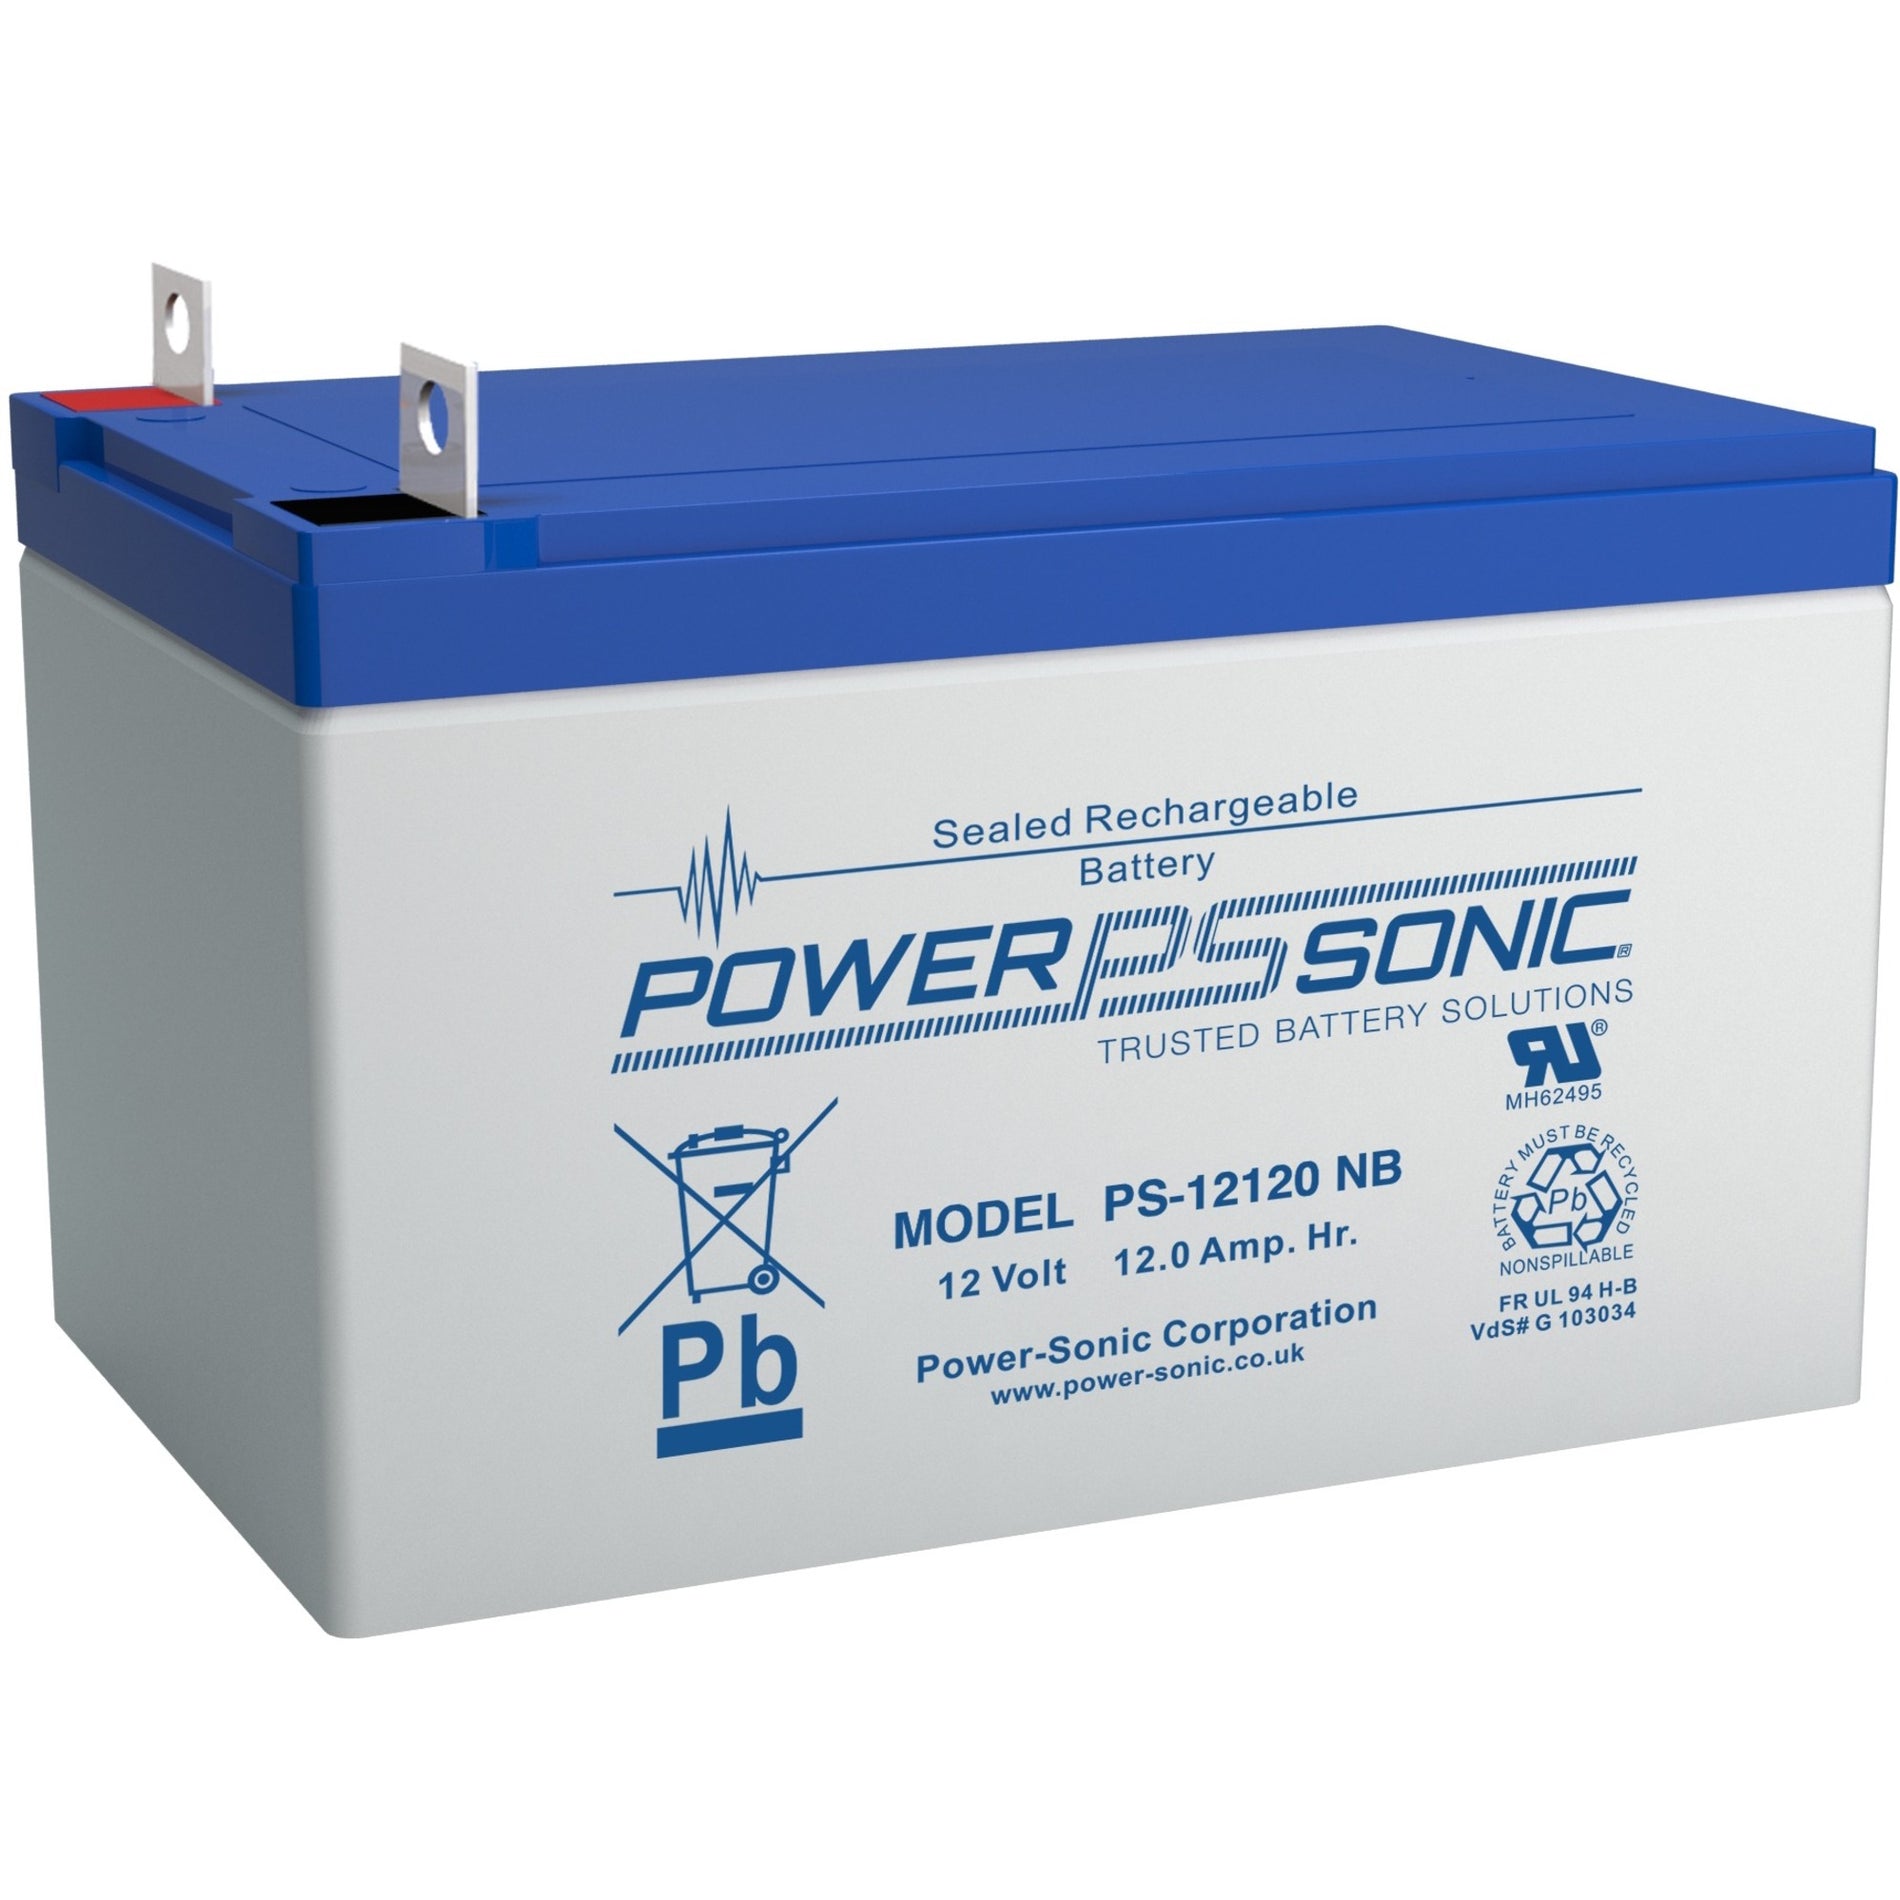 Power Sonic PS-12120NB PS-12120 Battery, 12V 12AH NB Terminal, 5 Year Warranty, Approved for Air Transport